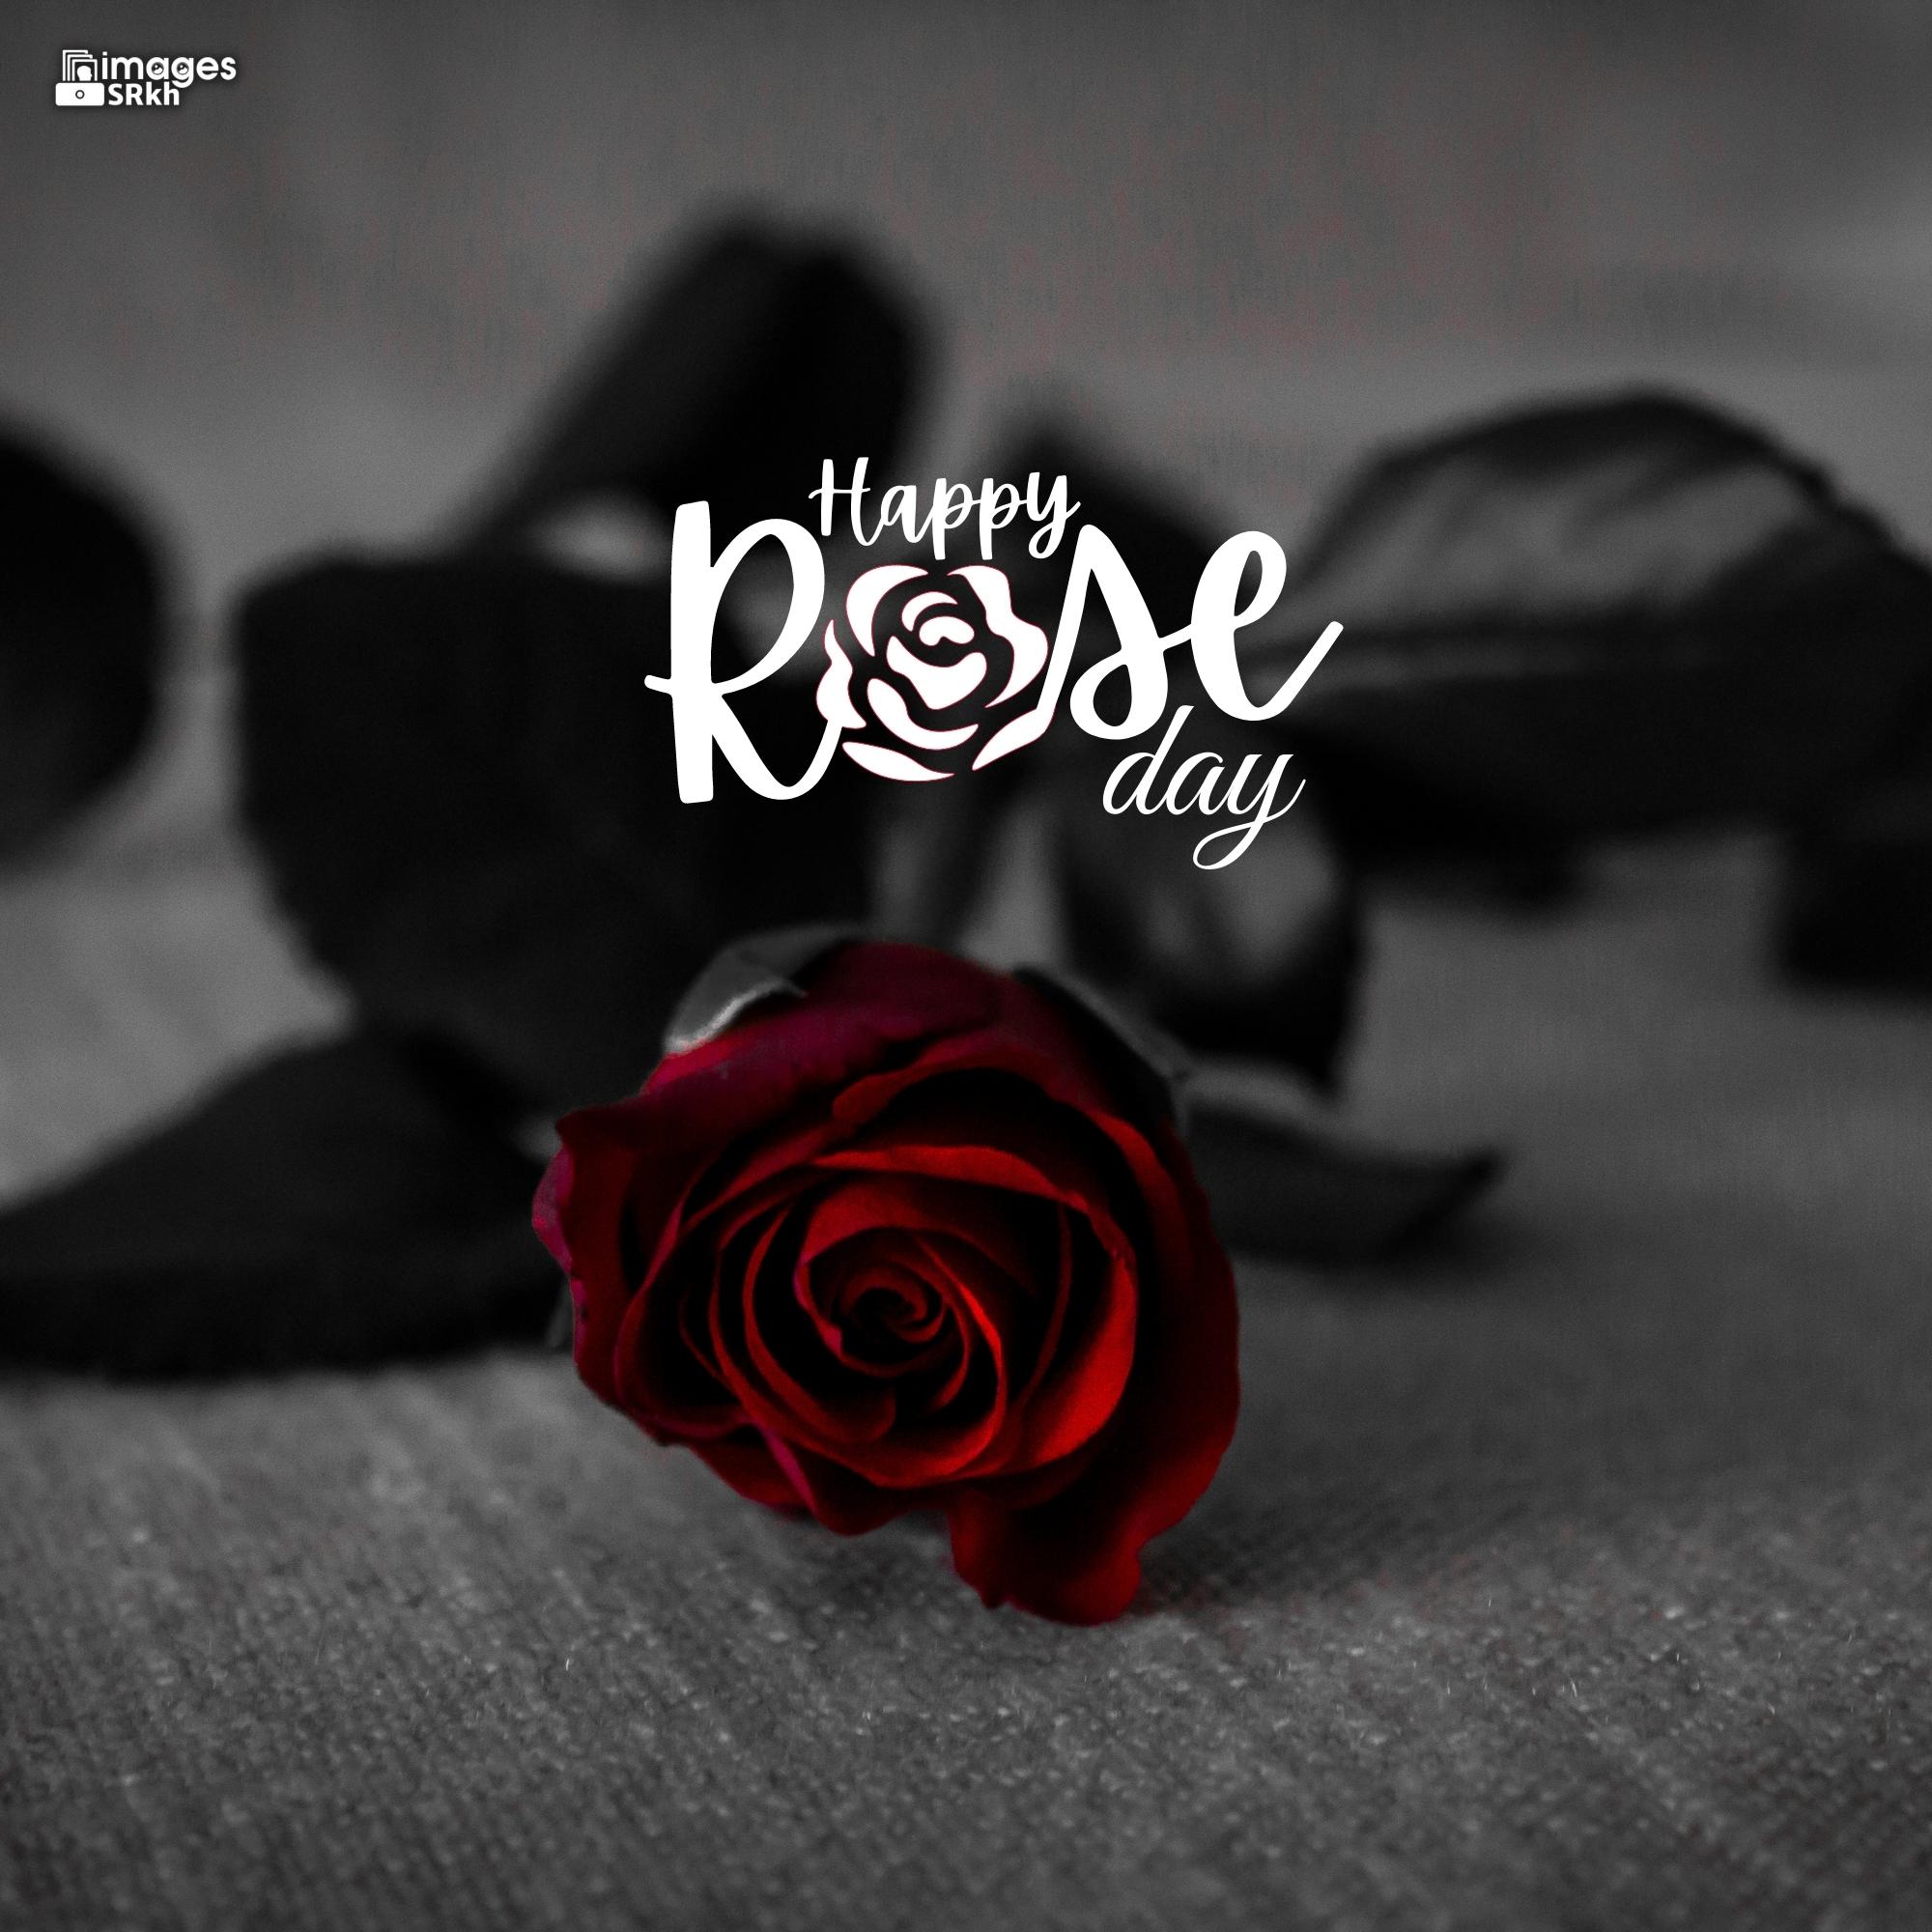 Happy Rose Day Image Hd Download (40)